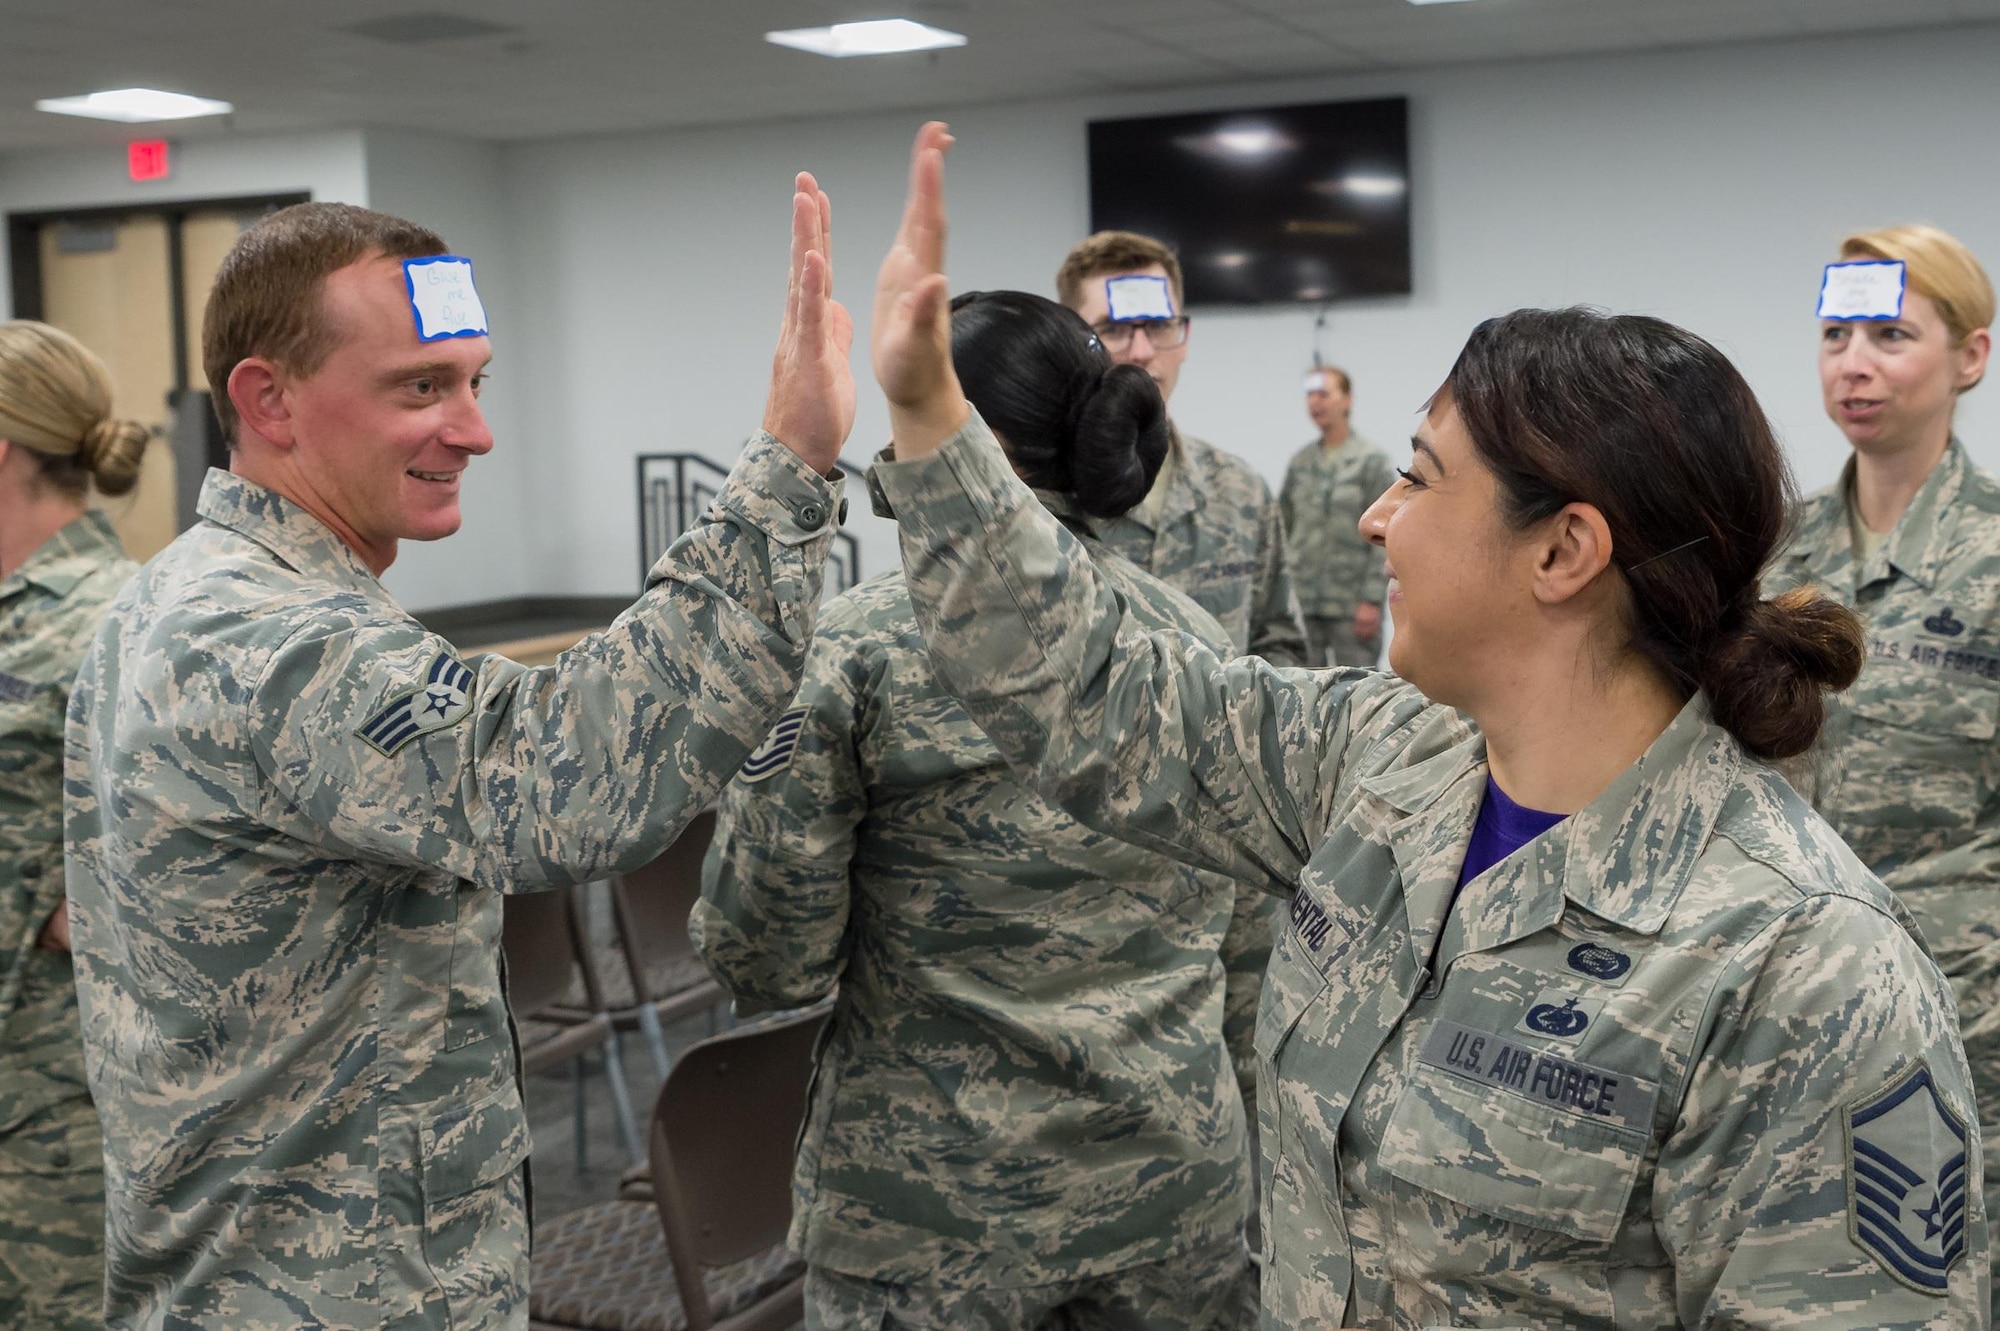 U.S. Air Force Master Sgt. Emma Simental gives a high-five to Senior Airman Spencer Hess during a brown bag lunch presentation, June 10, 2016 in Cheyenne, Wyoming. Simental, Hess and other Airmen with the 153rd Airlift Wing participated in interactive activities and listened to speakers on diversity, inclusion, and the power of mentoring. (U.S. Air National Guard photo by Senior Master Sgt. Charles Delano/released)